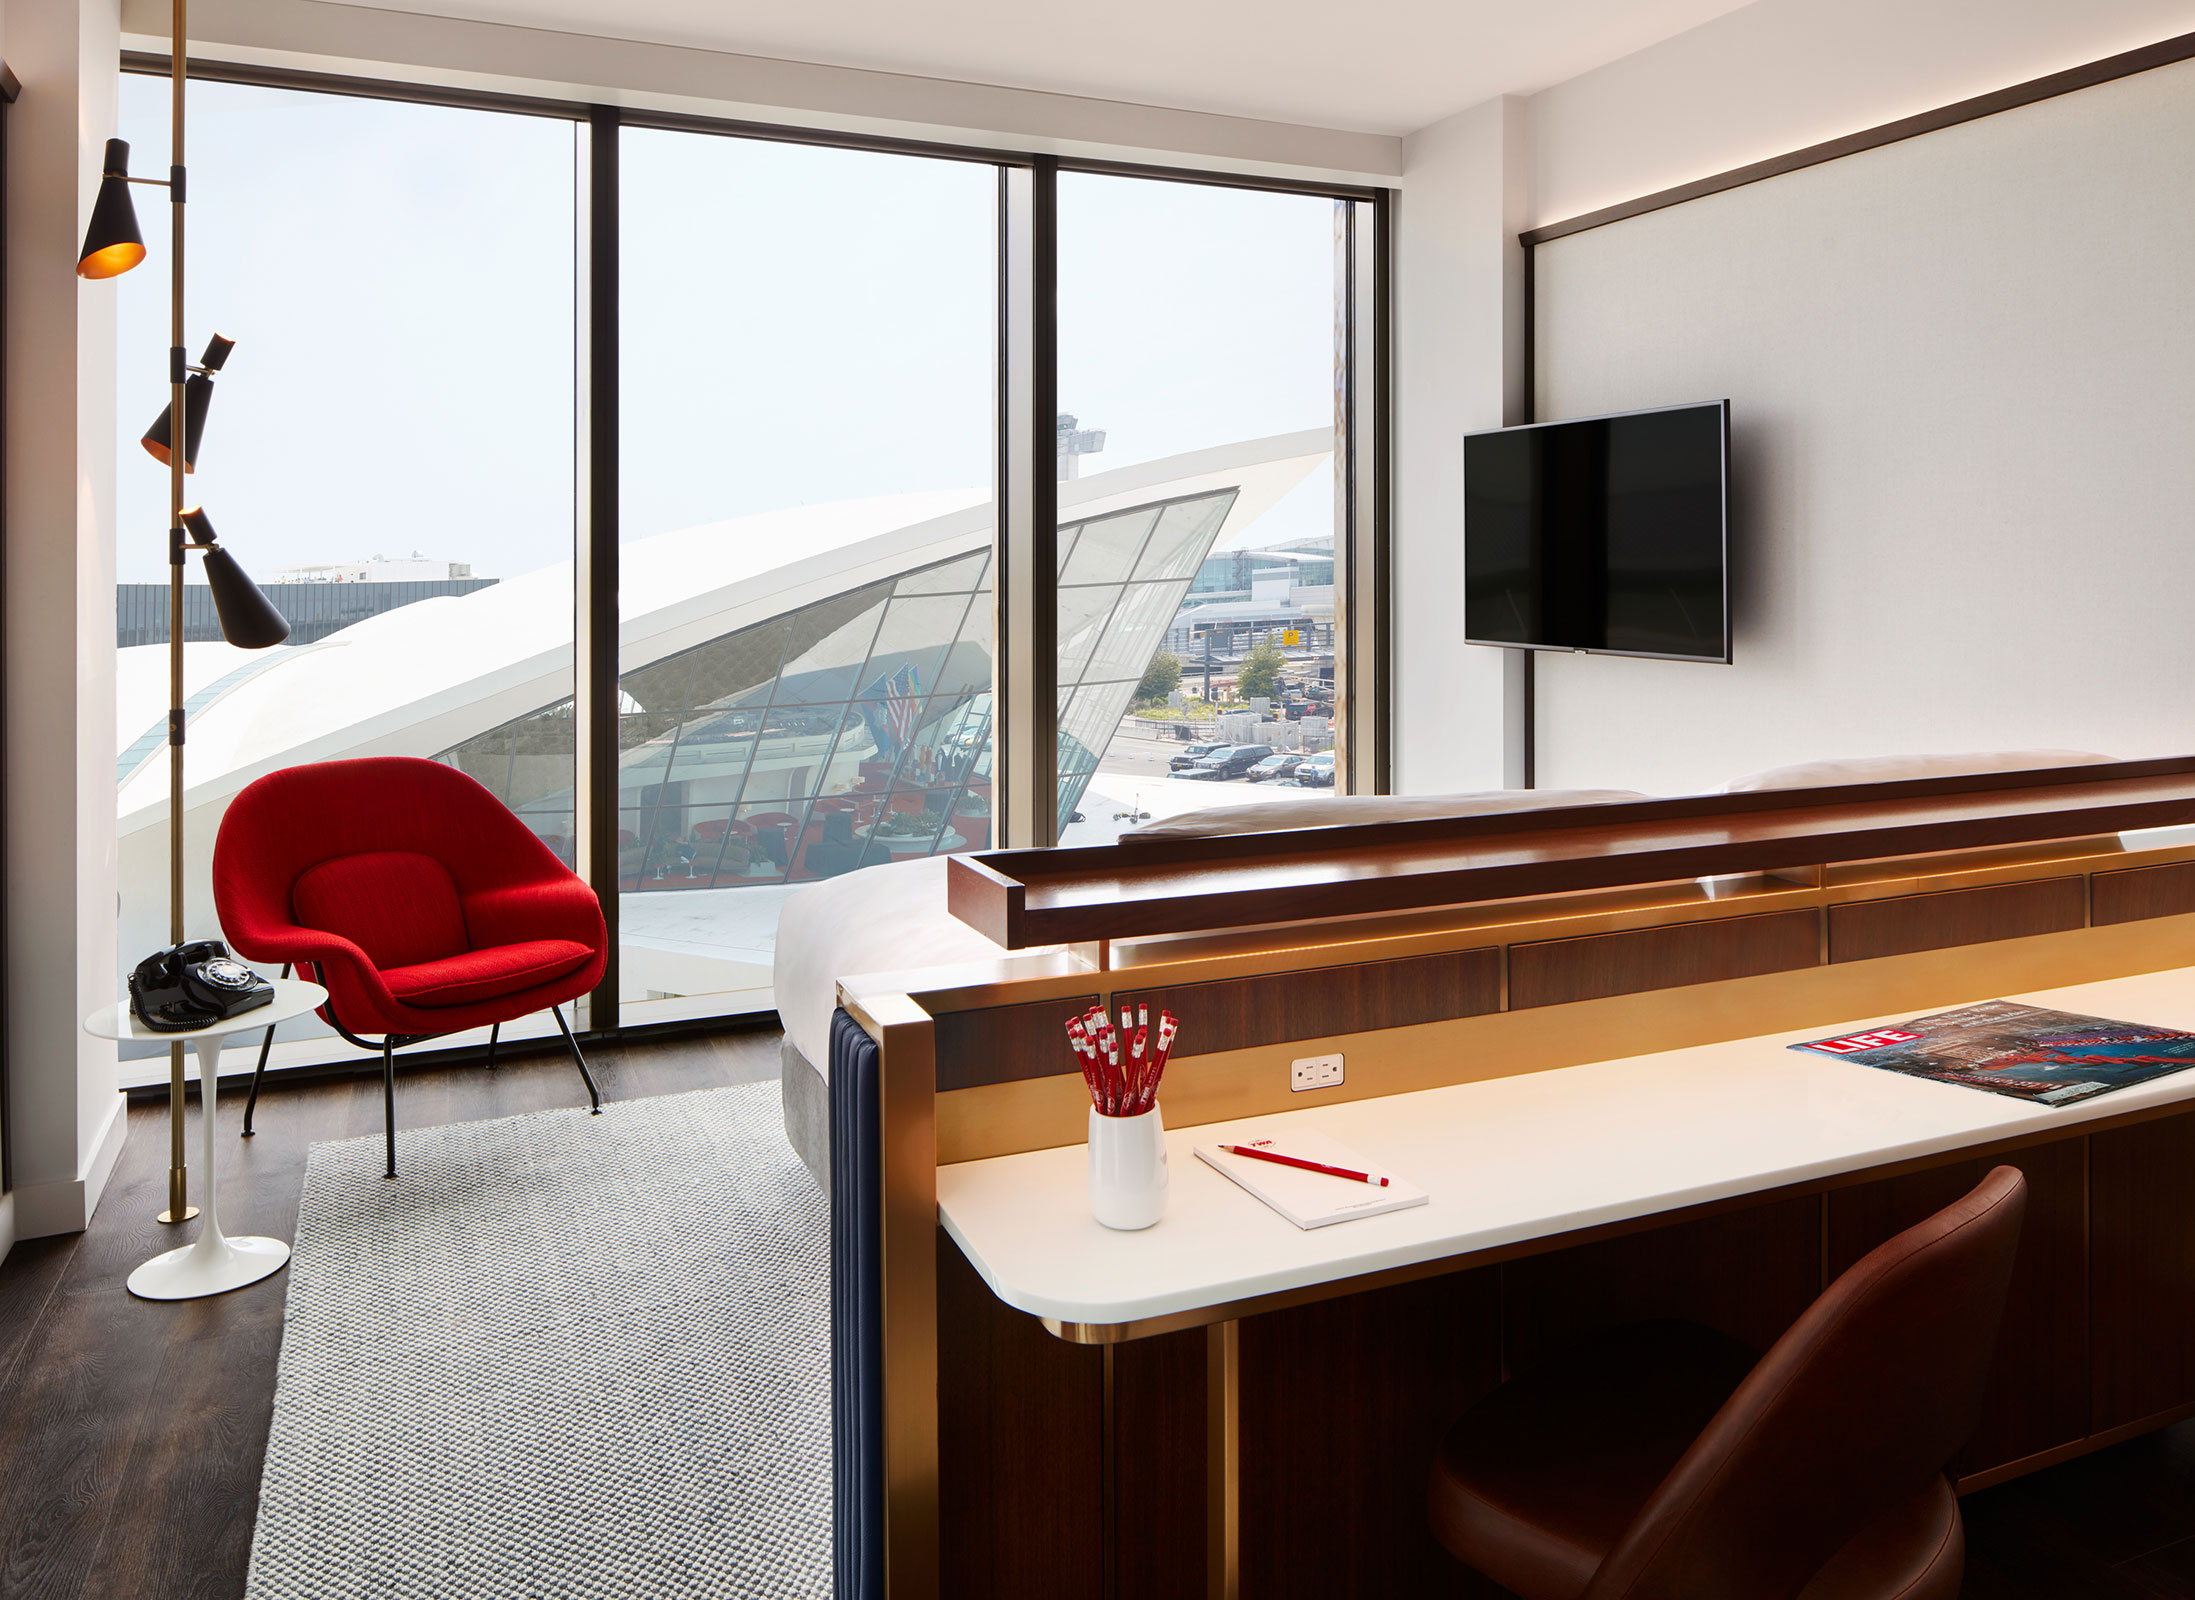 TWA Hotel Deluxe King With Historic TWA View